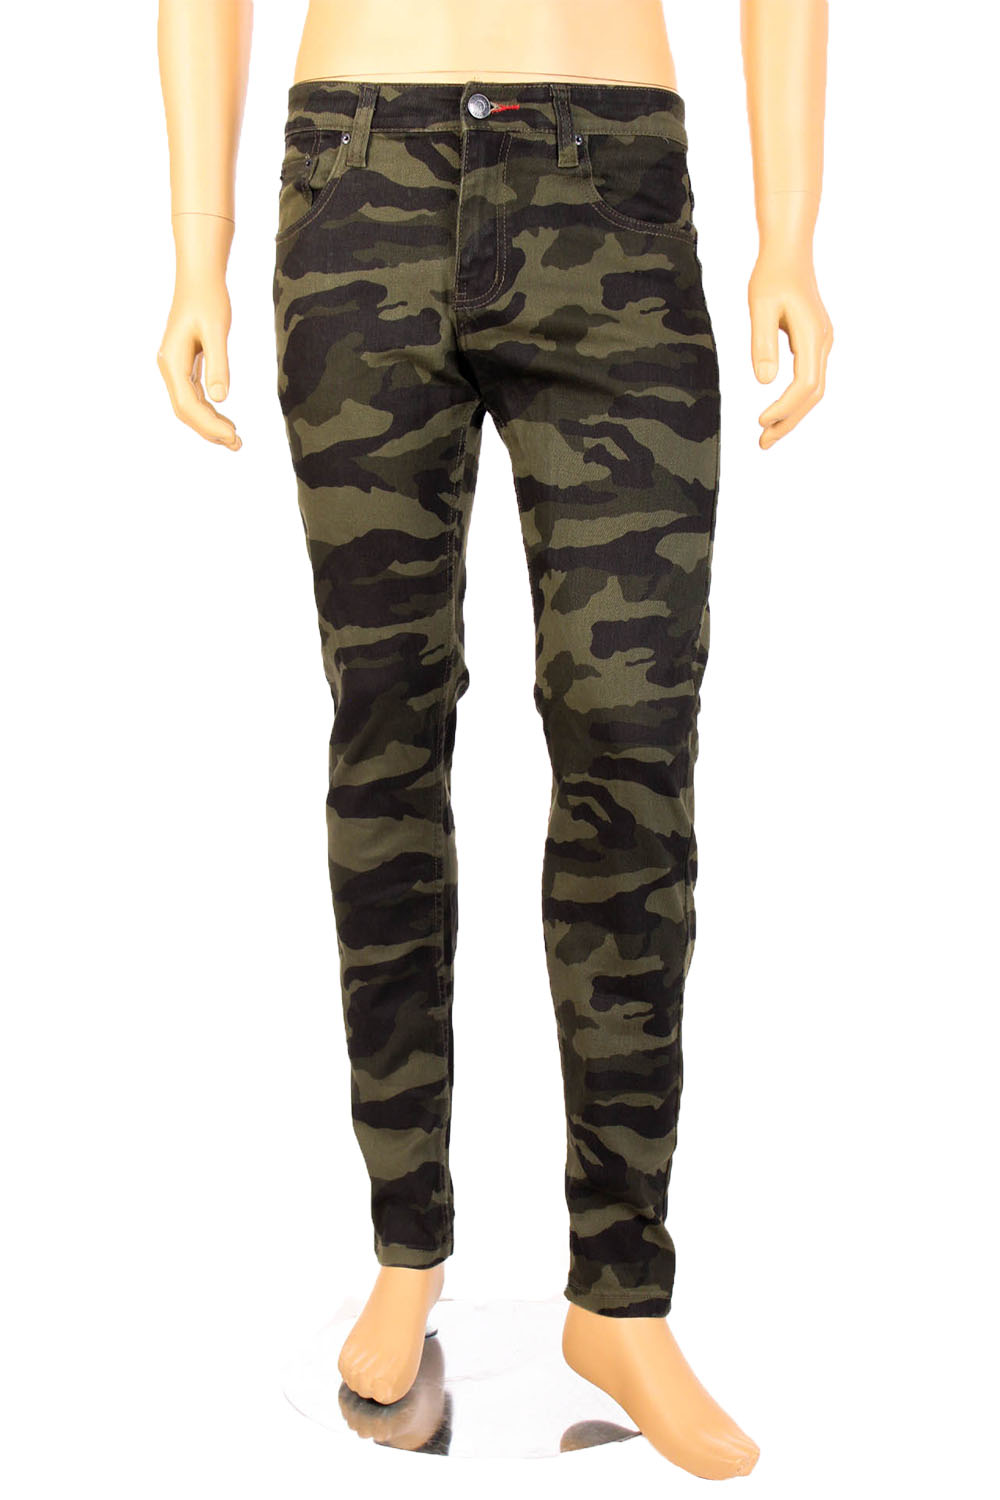 MEN'S CAMO TWILL STRETCH SKINNY JEANS 3 COLORS VICTORIOUS